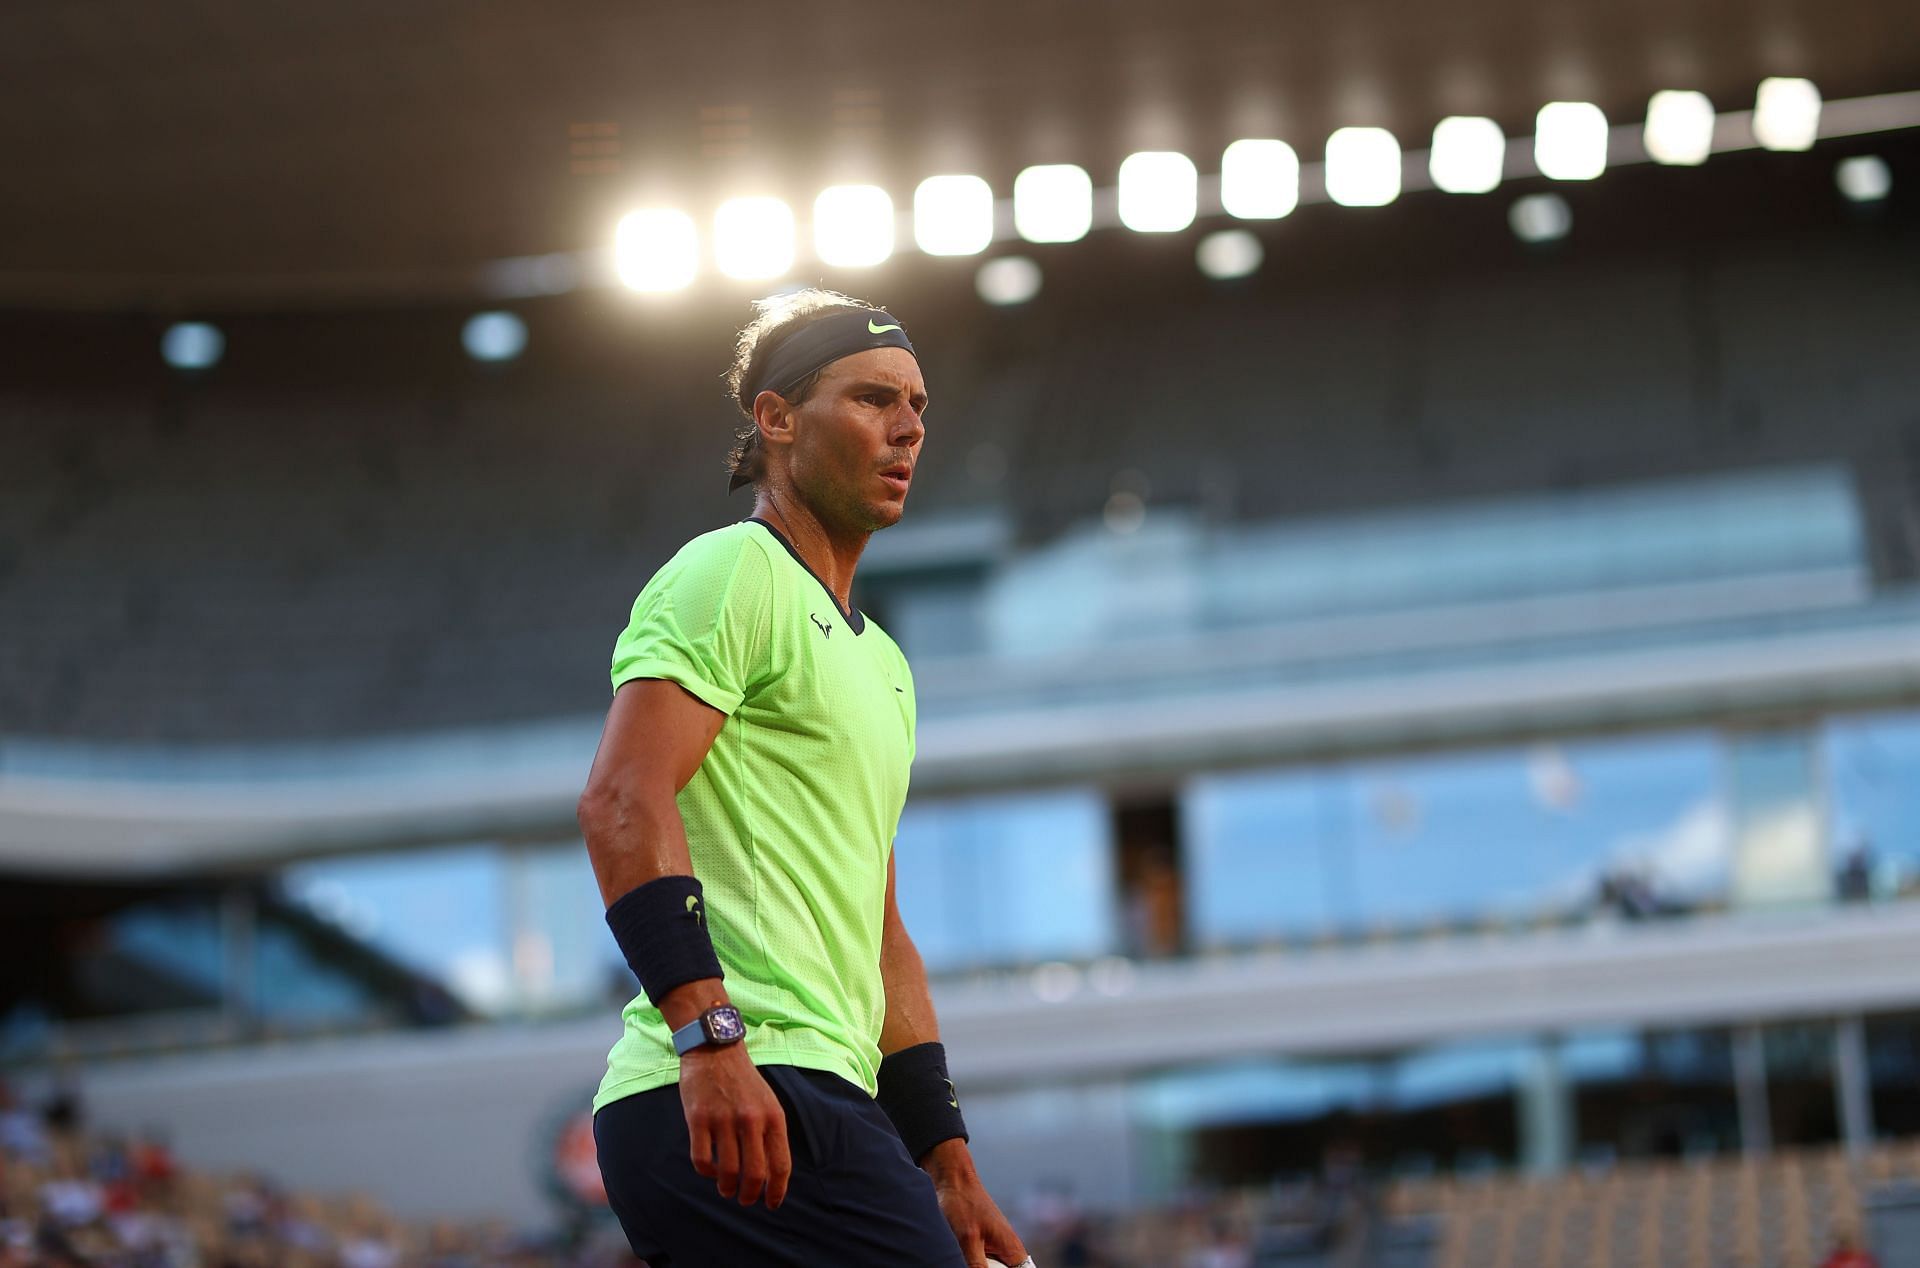 Rafael Nadal will be eyeing a 14th French Open title